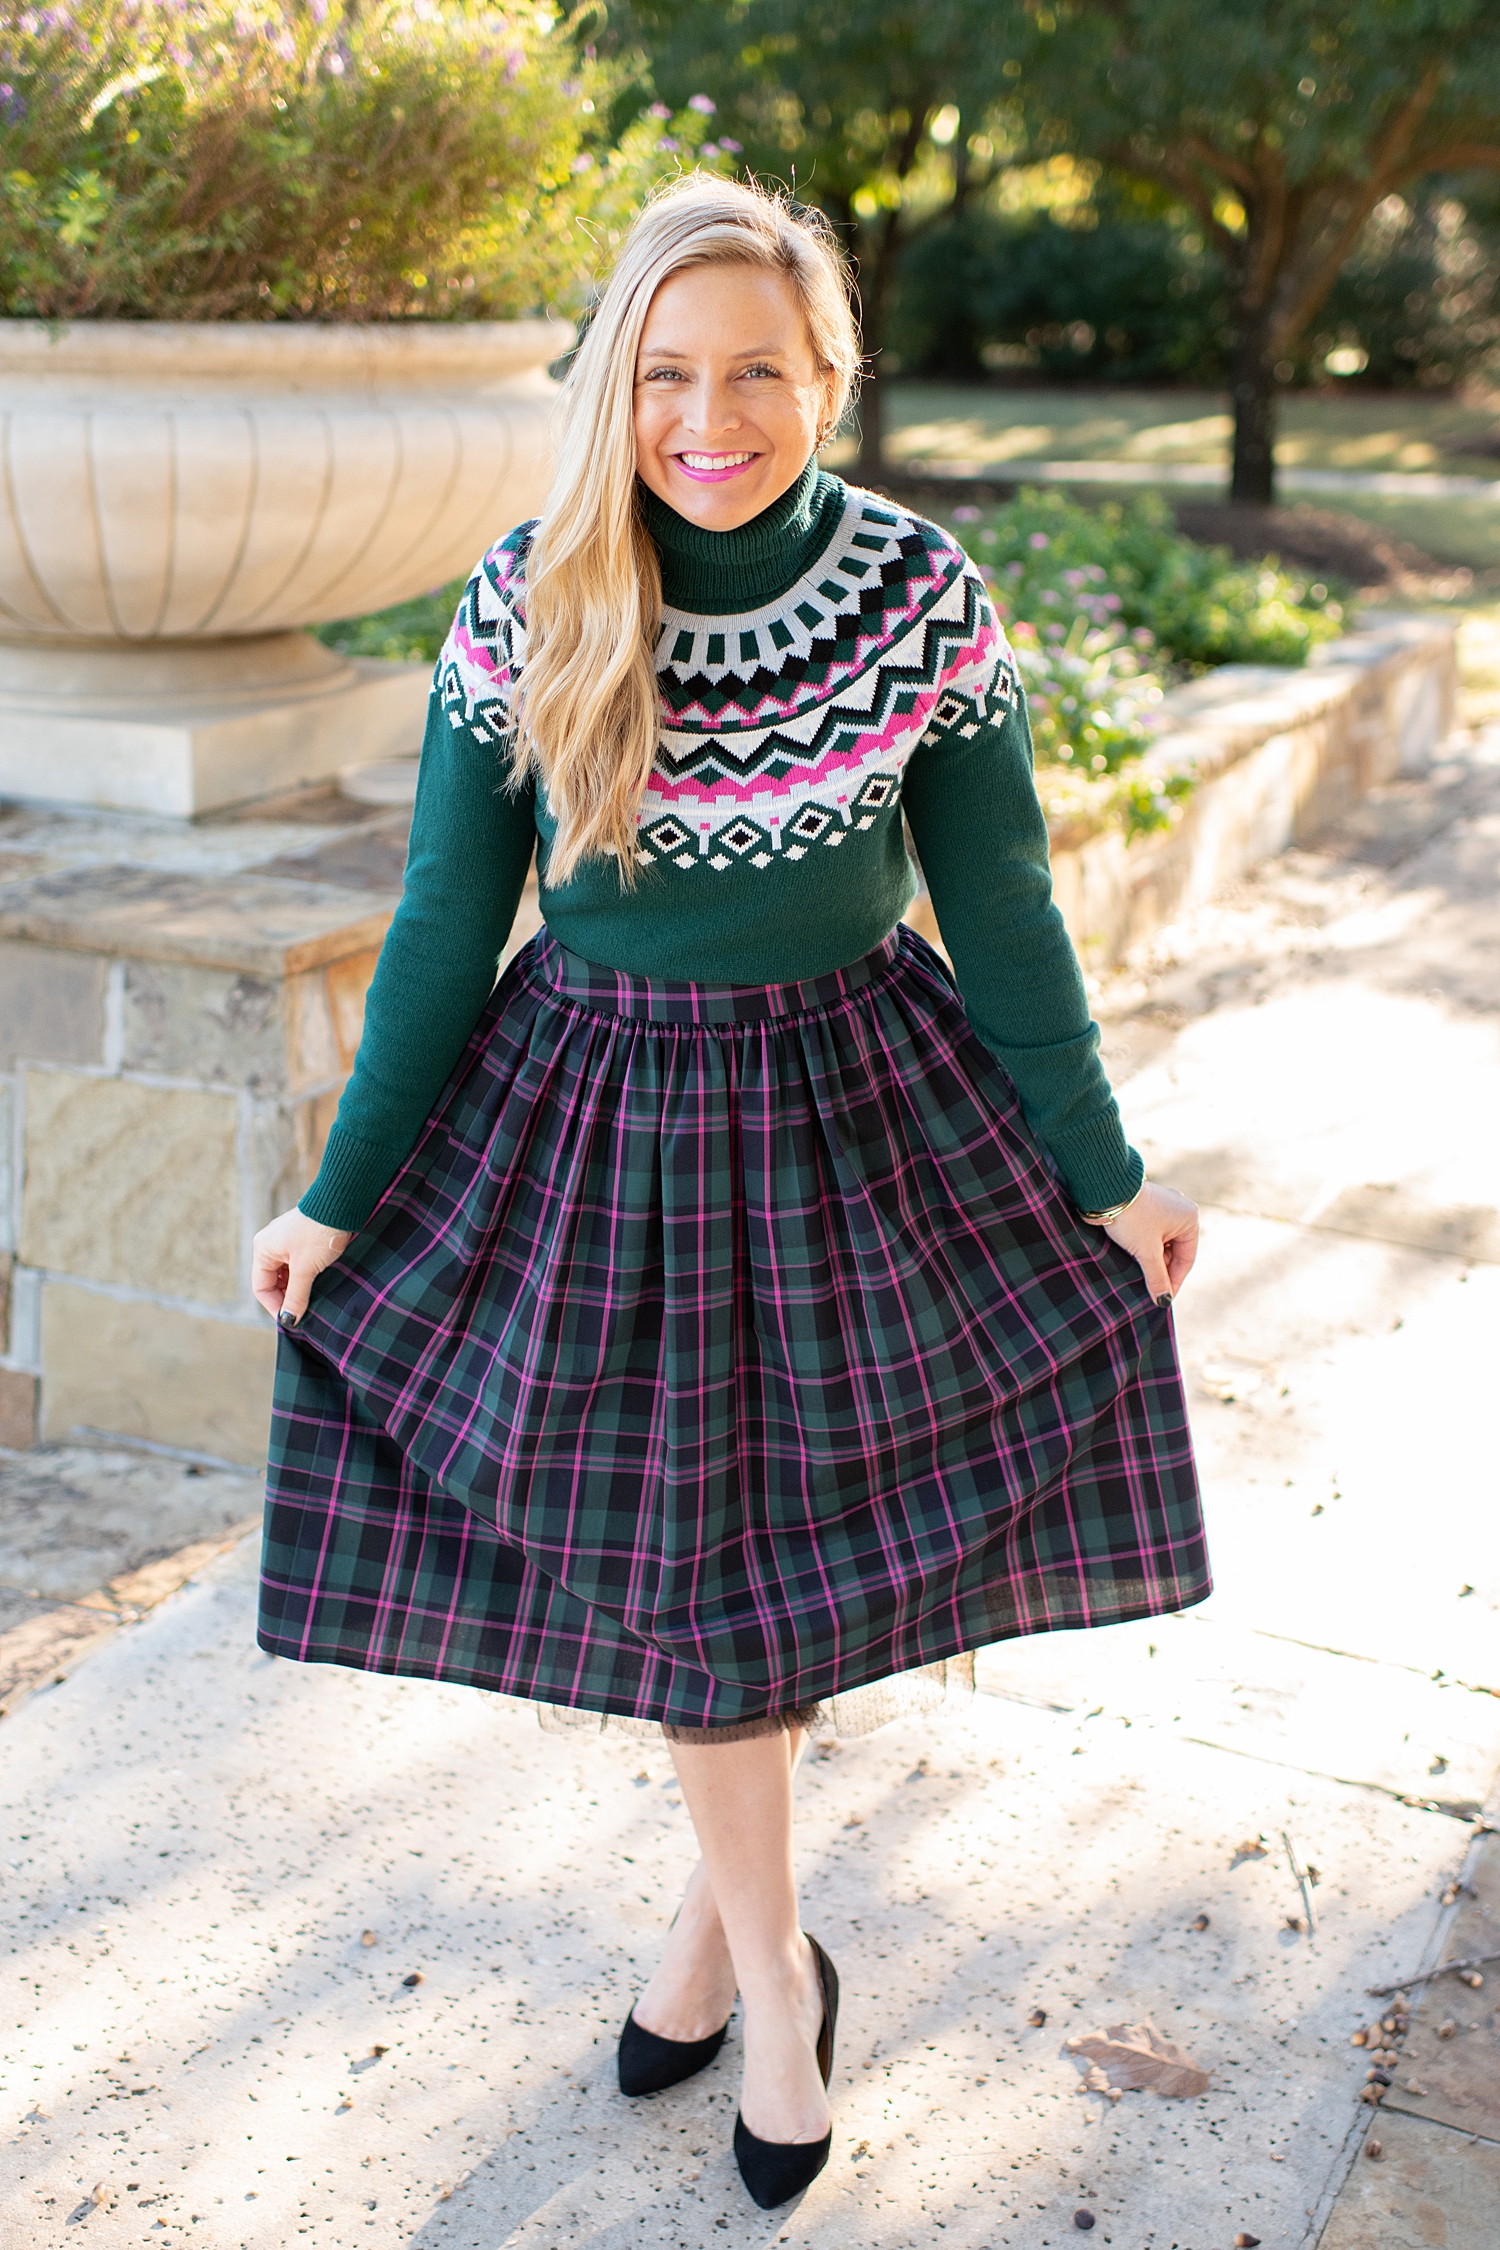 Top Houston fashion blogger, Fancy Ashley, features 7 Holiday Outfits perfect for the season: image of a woman wearing a Plaid skirt, green turtleneck sweater and Sam Edelman heels, all available at Nordstrom